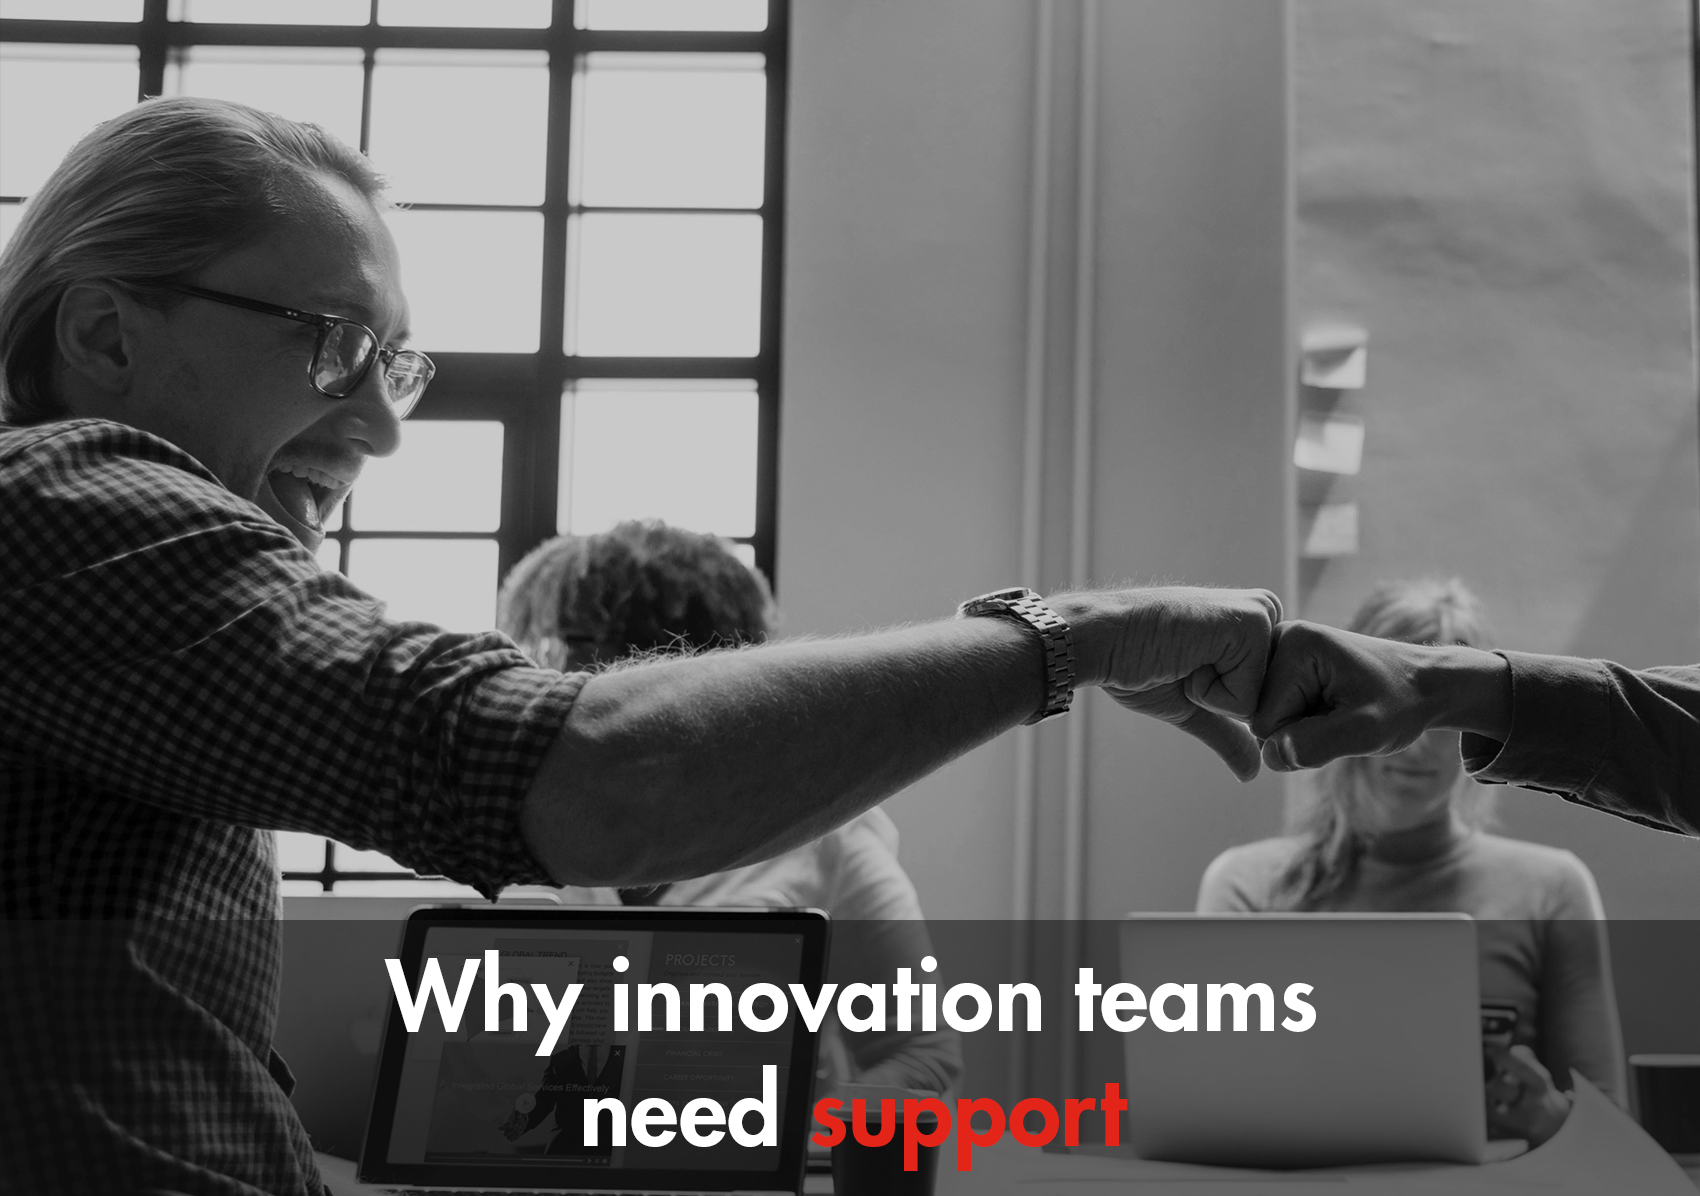 WHY INNOVATION TEAMS NEED SUPPORT